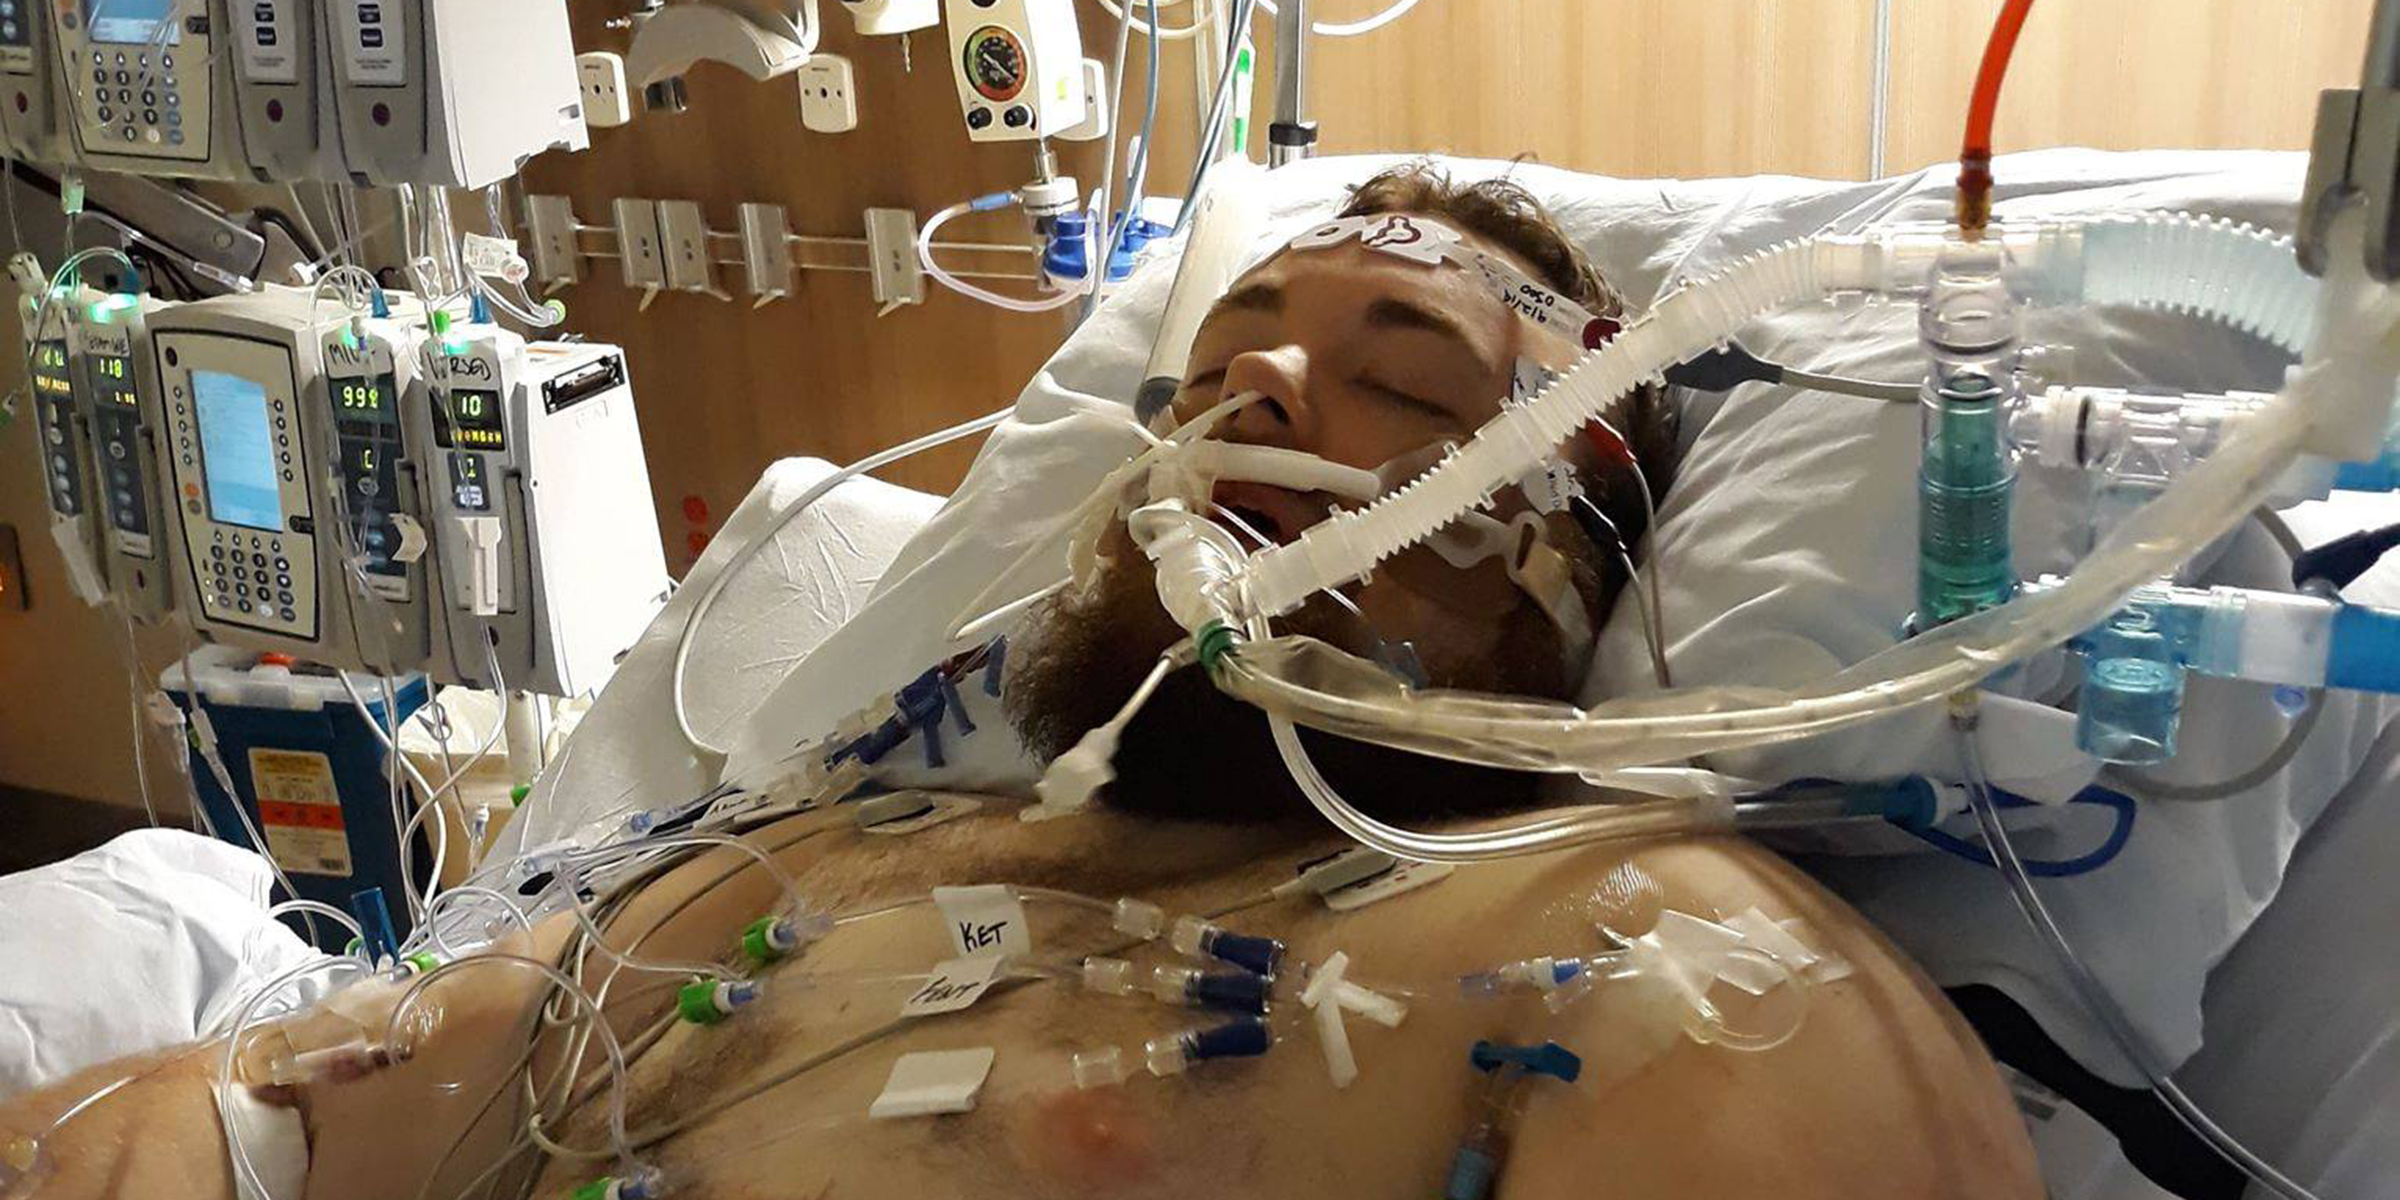 A man in the hospital due to lung complications